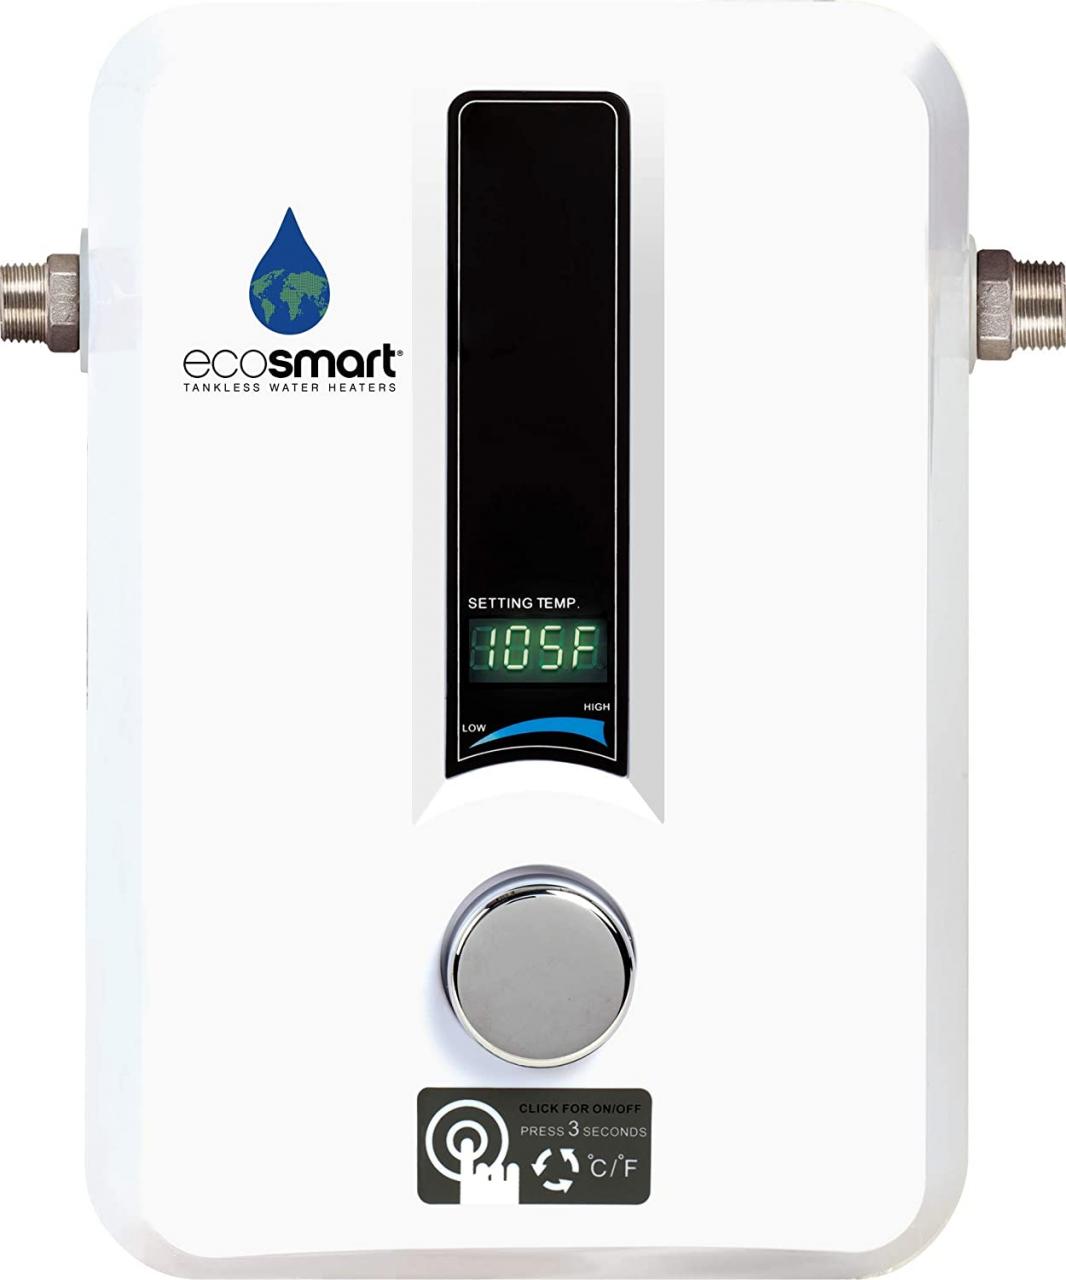 EcoSmart ECO-11 Electric Tankless Water Heater 13.6 KW – Tank The Tank